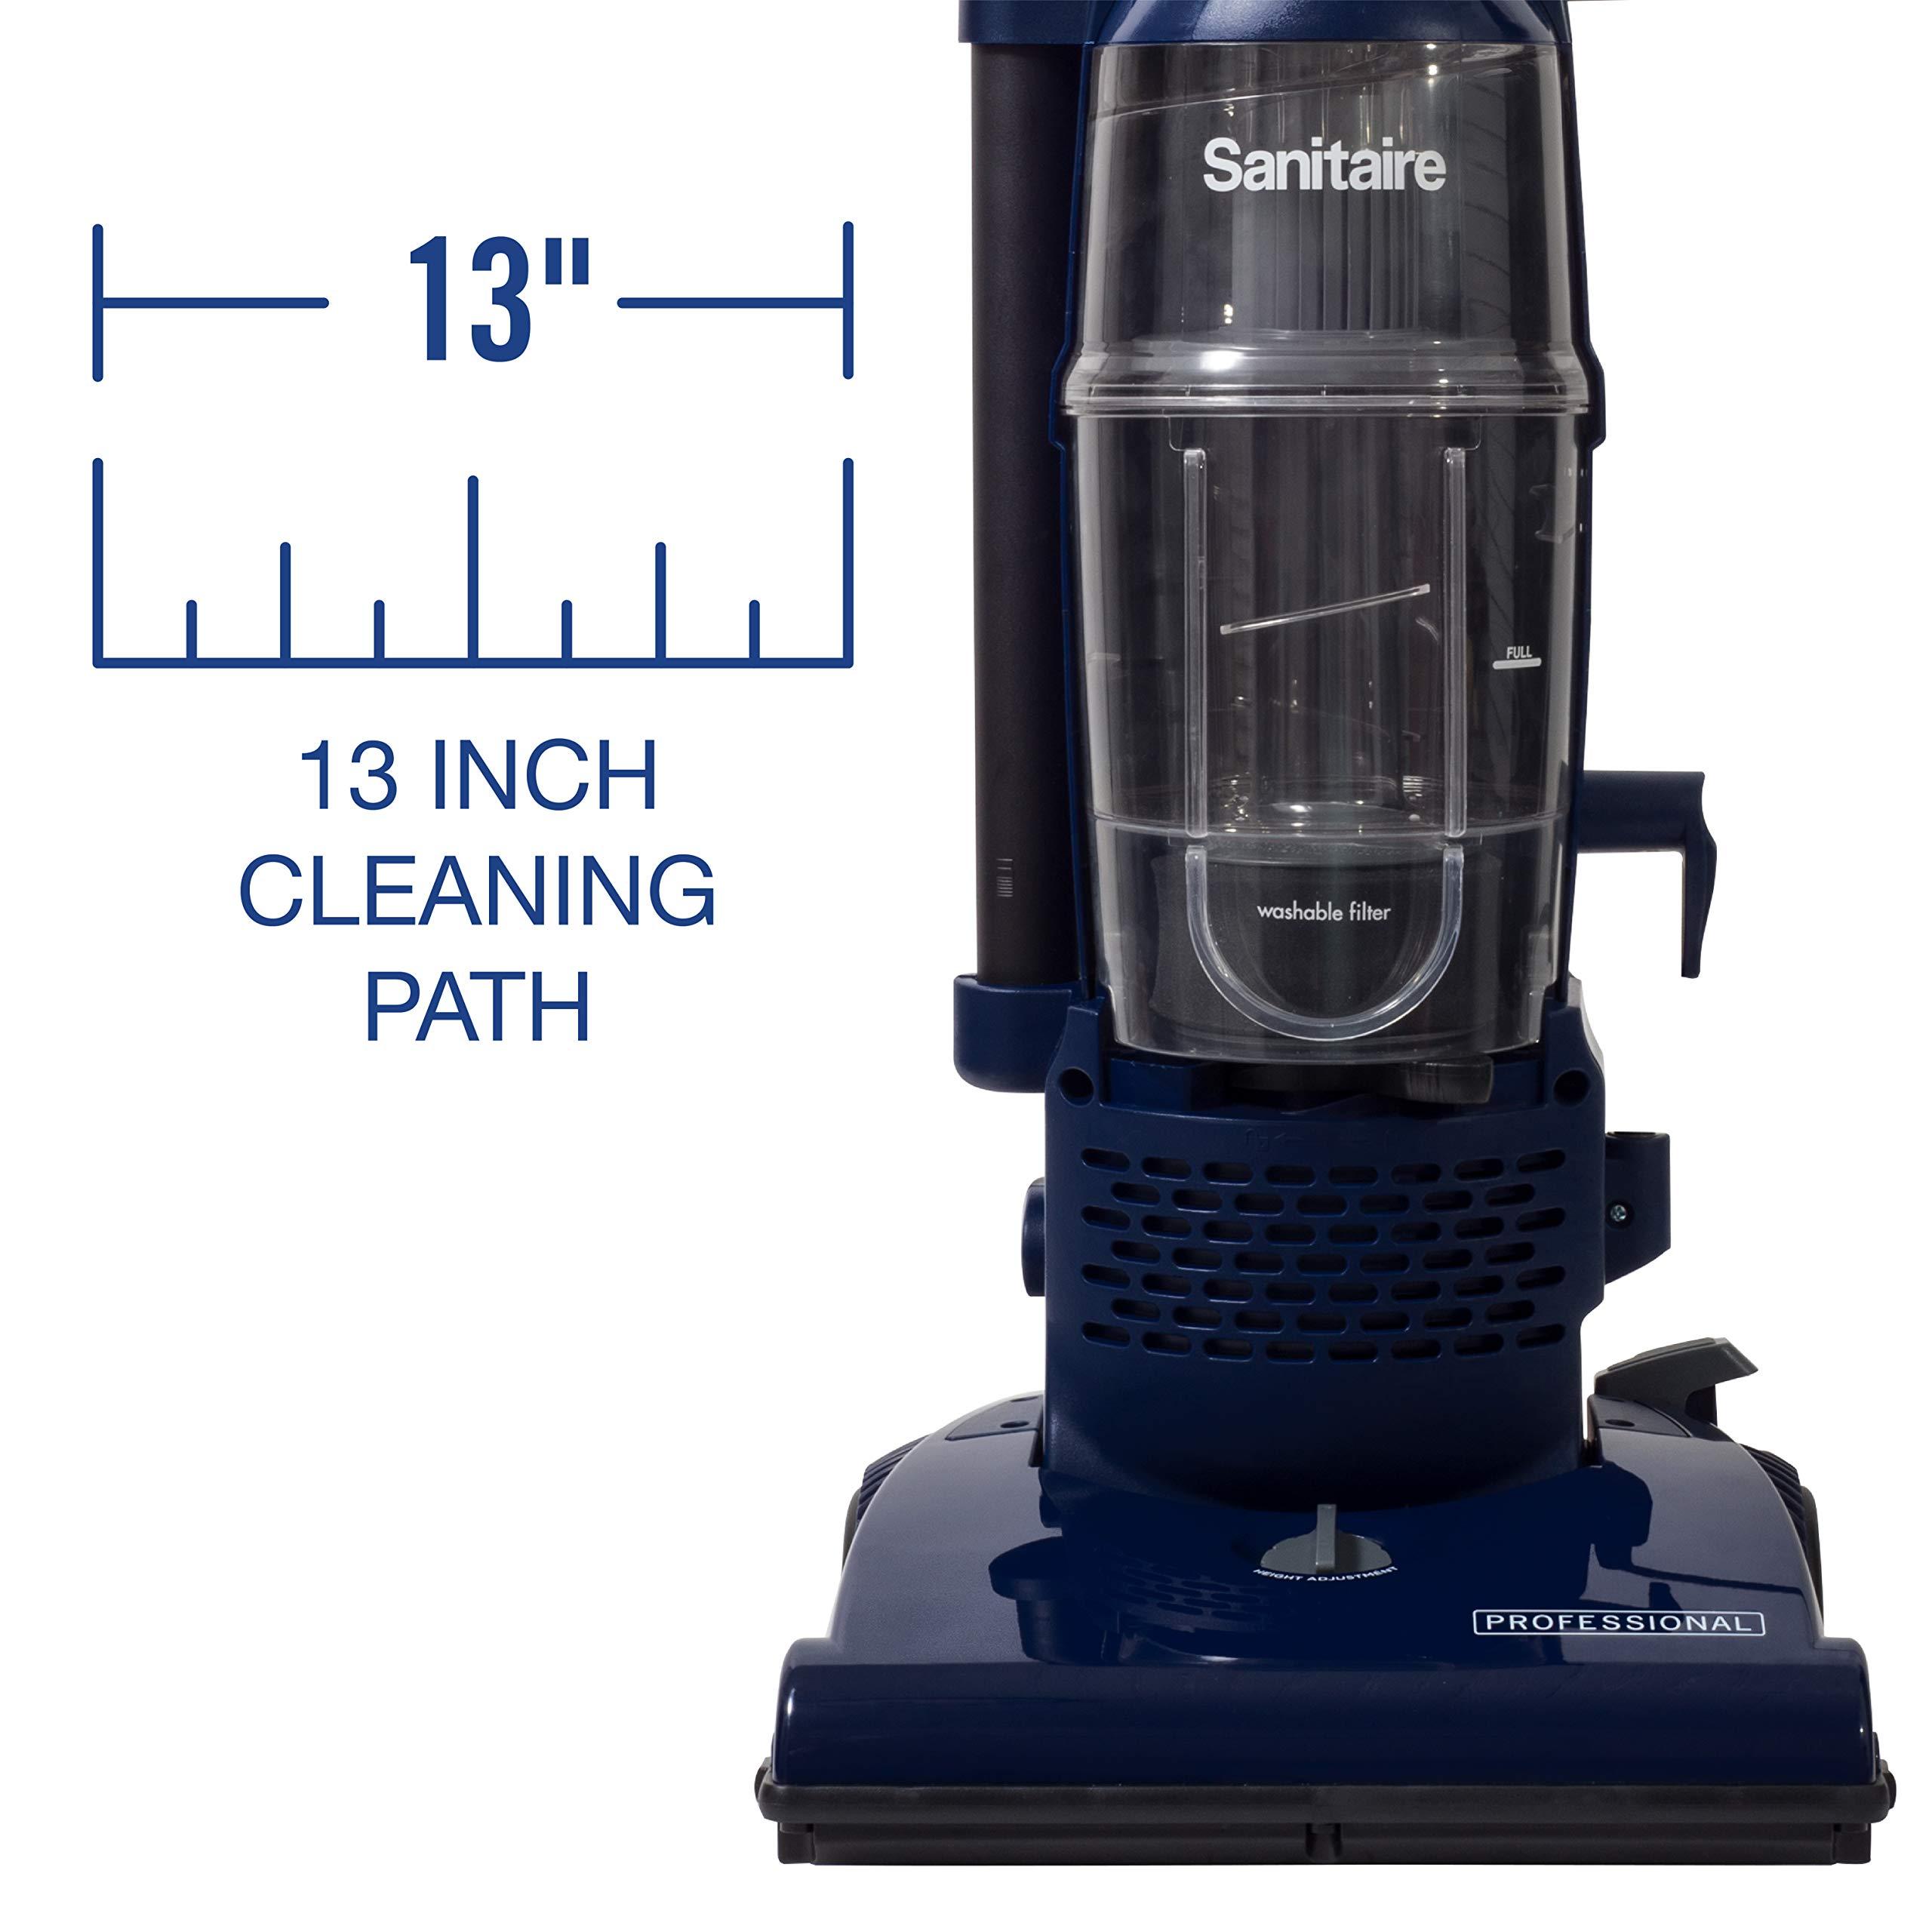 Sanitaire Professional Bagless Upright Commercial Vacuum with Tools, SL4410A - image 3 of 6